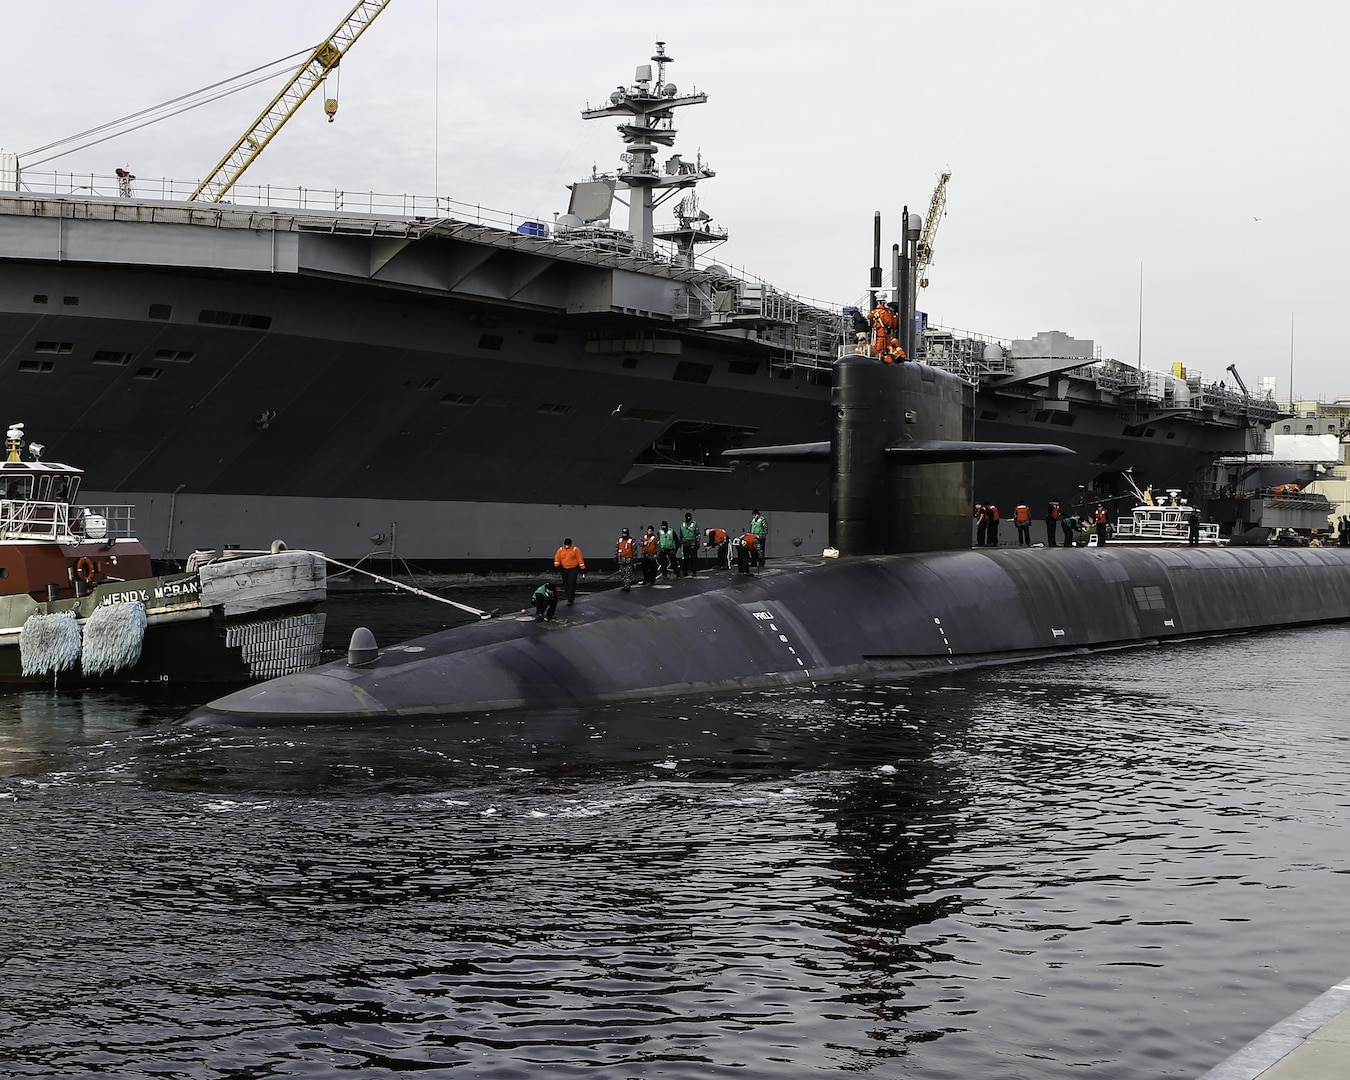 160212-N-SY521-003 NORFOLK, Virginia (Feb. 12, 2016) USS Maryland (SSBN 738) is readied for return to the fleet following the completion of its engineered refueling overhaul. Maryland is the 13th of 18 operational Ohio-class ballistic missile submarines and is homeported in Kings Bay, Georgia.  